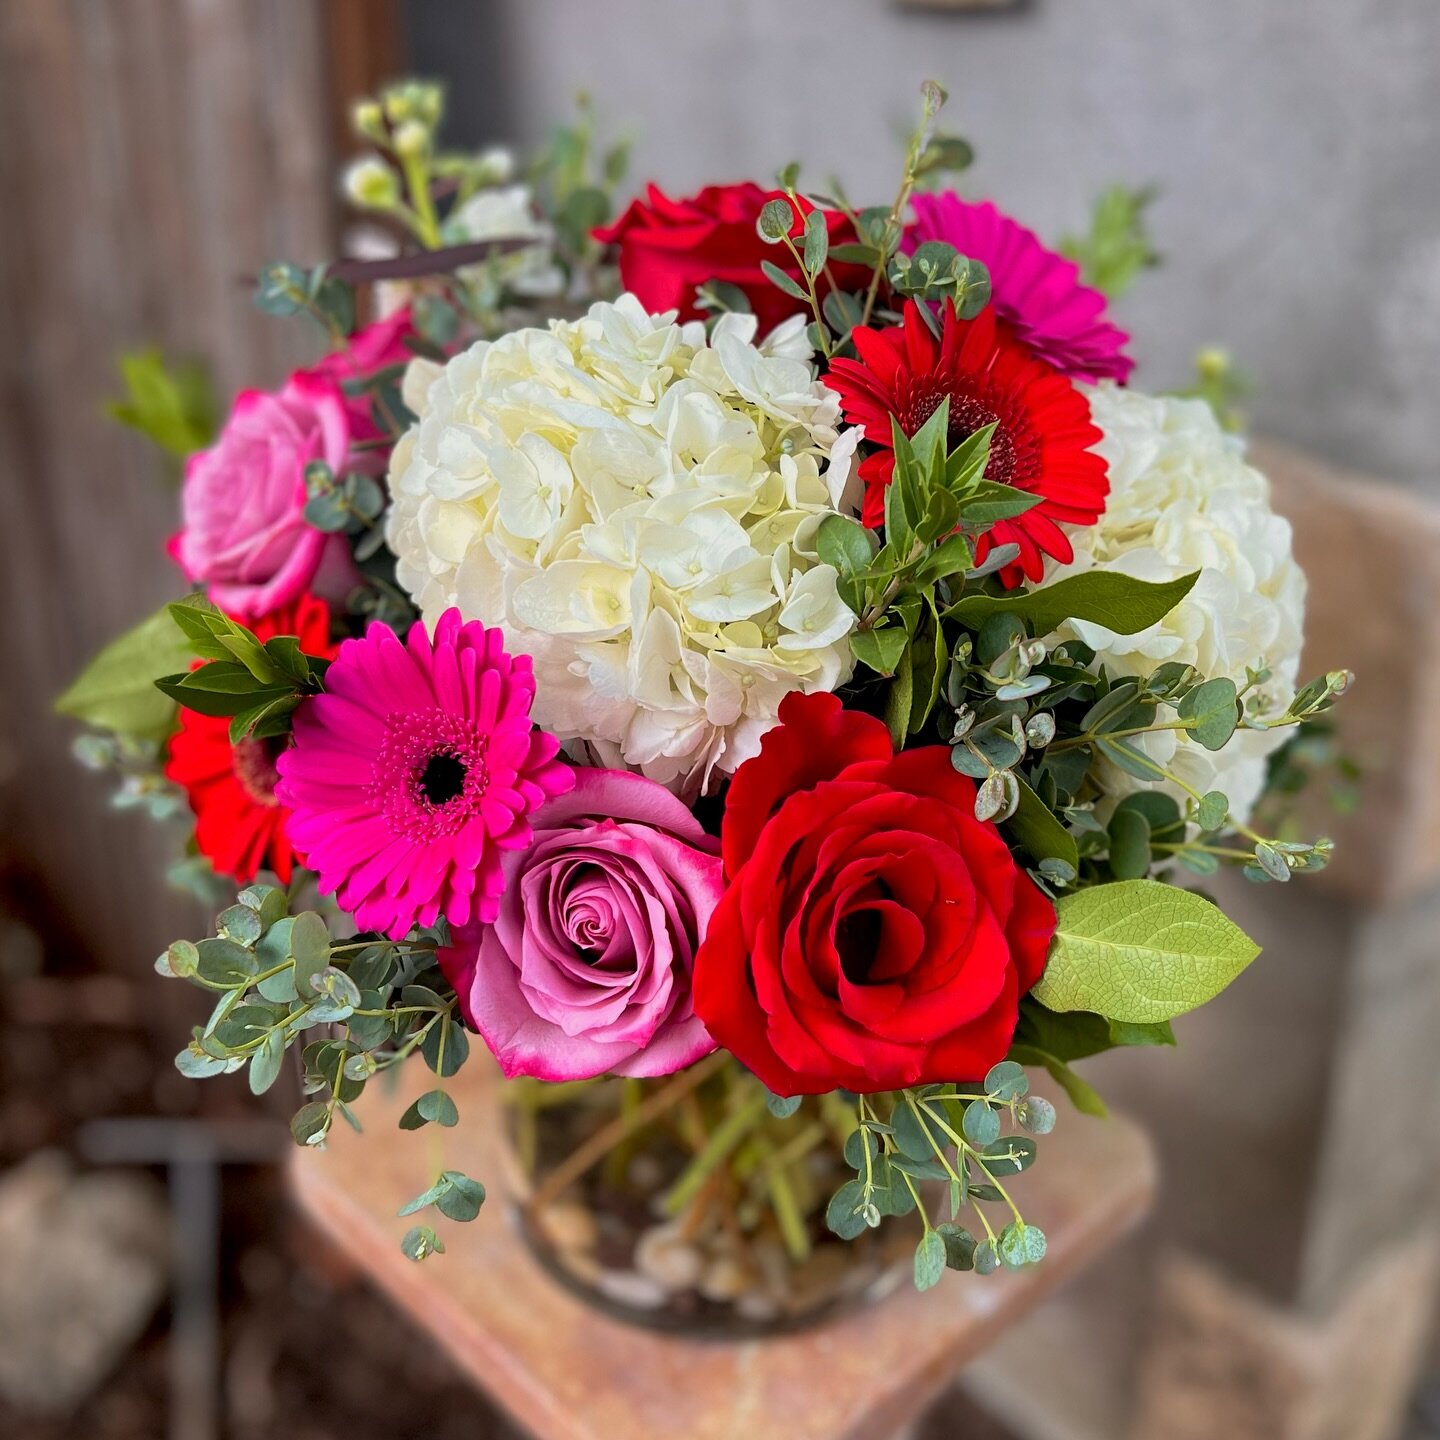 Have you ordered flowers for your Valentine yet?💘 We deliver locally or you can pick-up! Let our florists whip up something special for your sweetie. Give us a call at (253) 891-7631 or visit https://windmillfloralstudio.net
.
.
@windmill_floral_stu